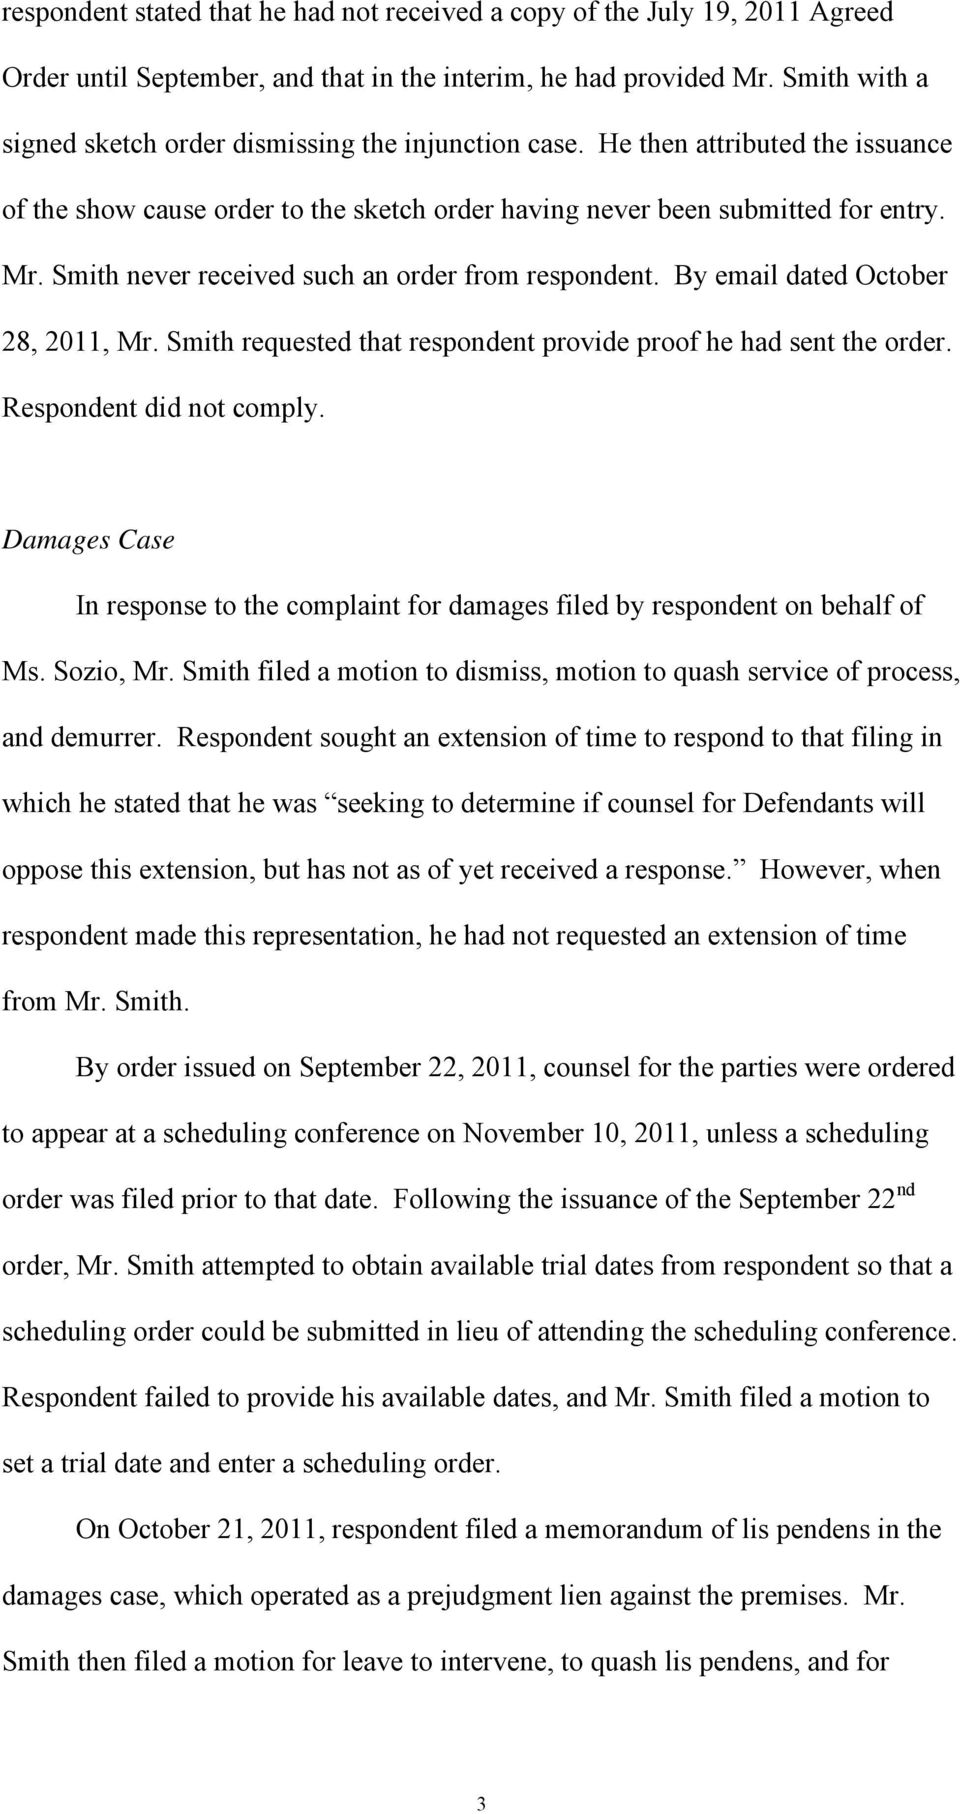 Smith never received such an order from respondent. By email dated October 28, 2011, Mr. Smith requested that respondent provide proof he had sent the order. Respondent did not comply.